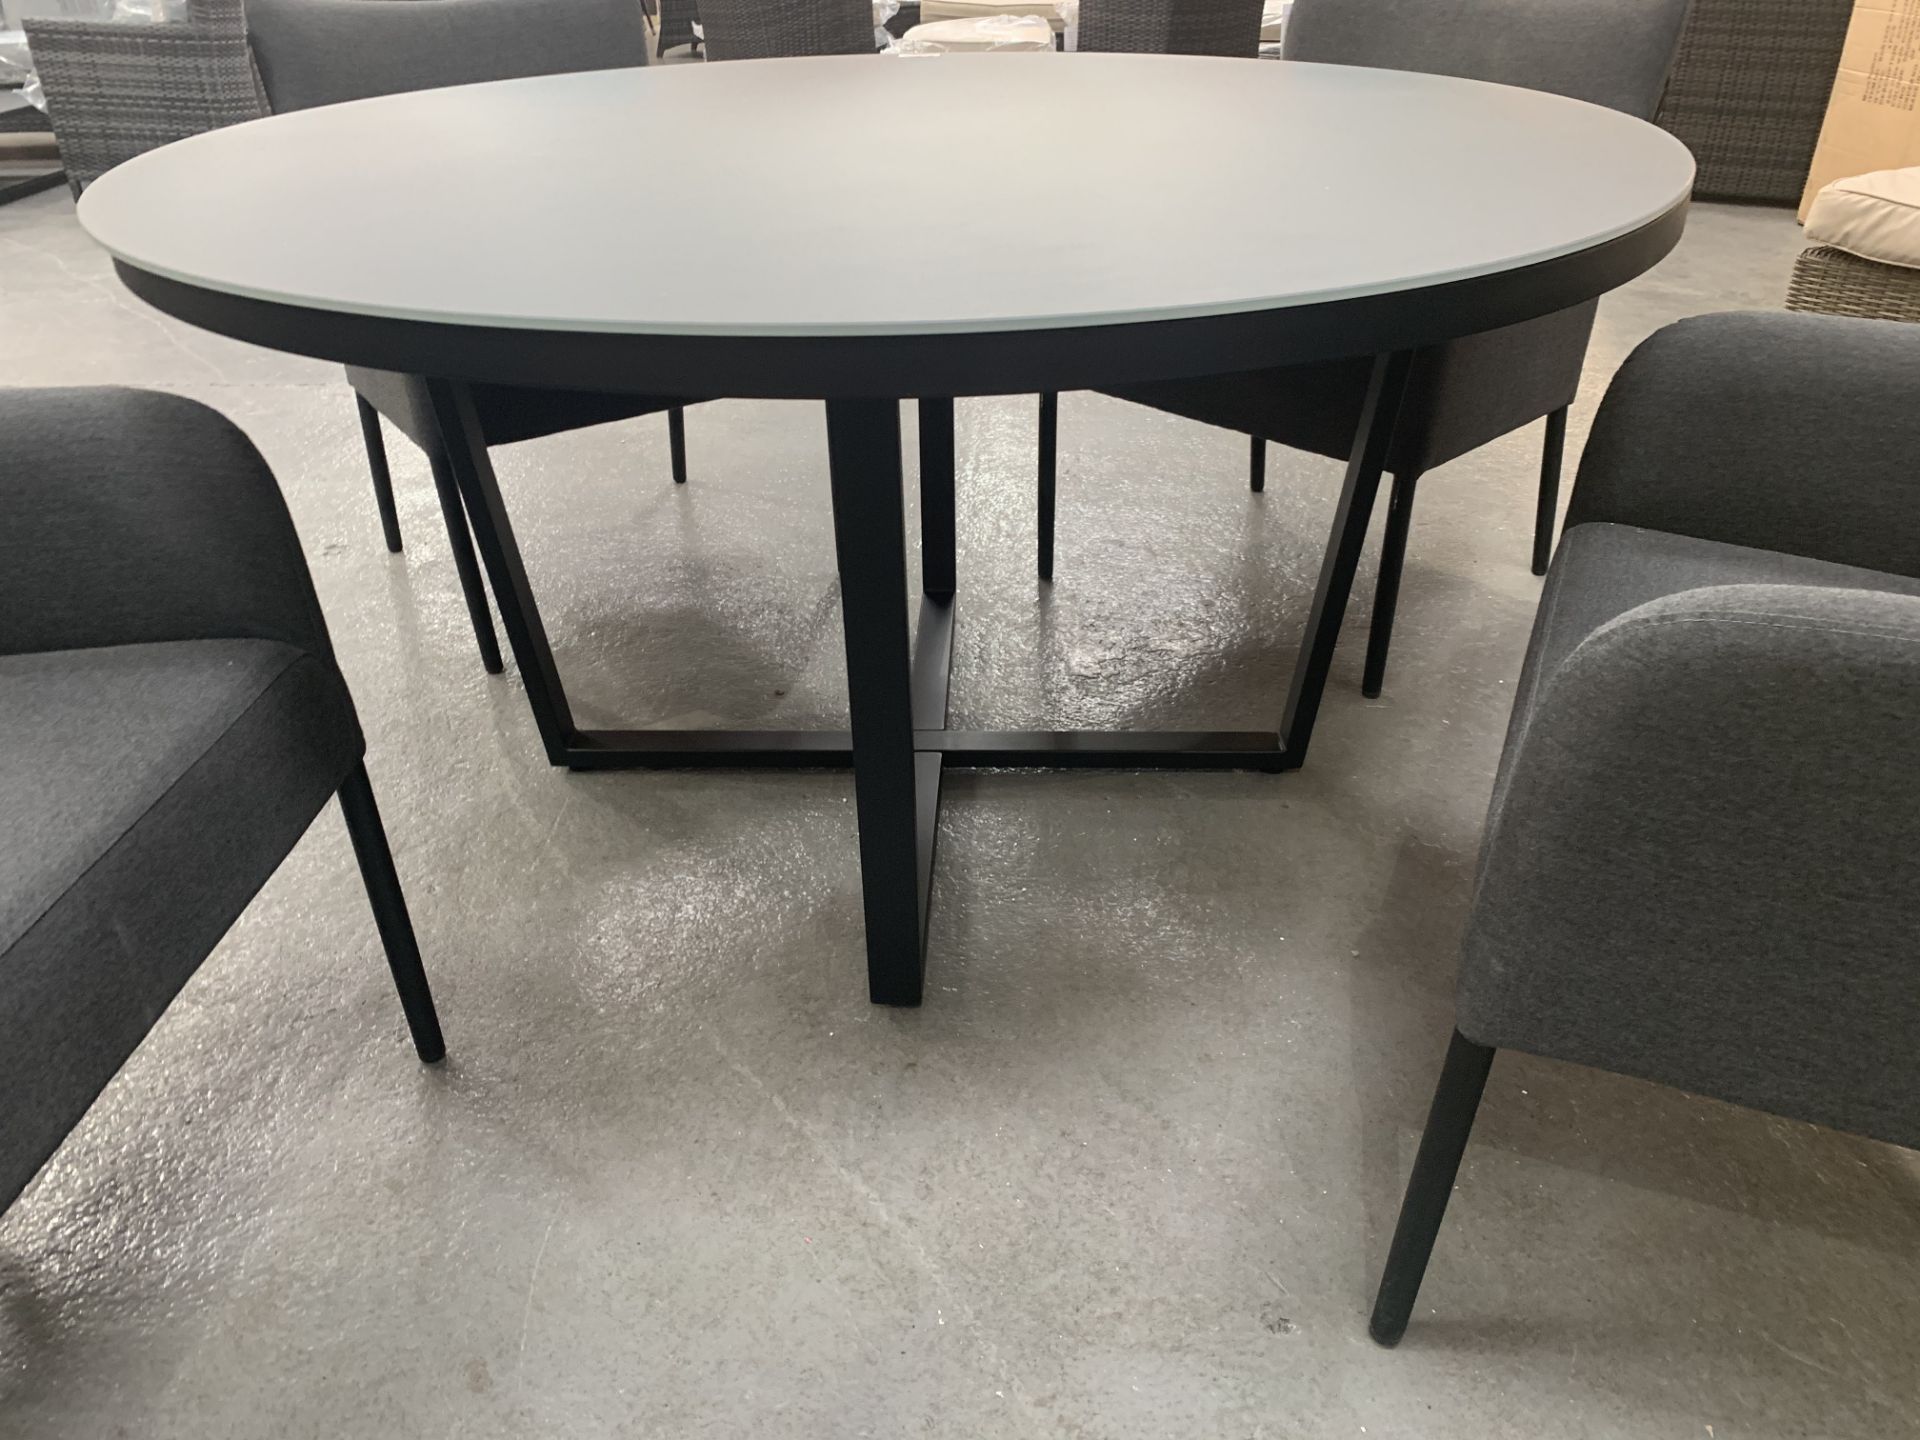 Maze Lounge Sunbrella Grey dining table with 4 matching tub chairs - Image 3 of 4